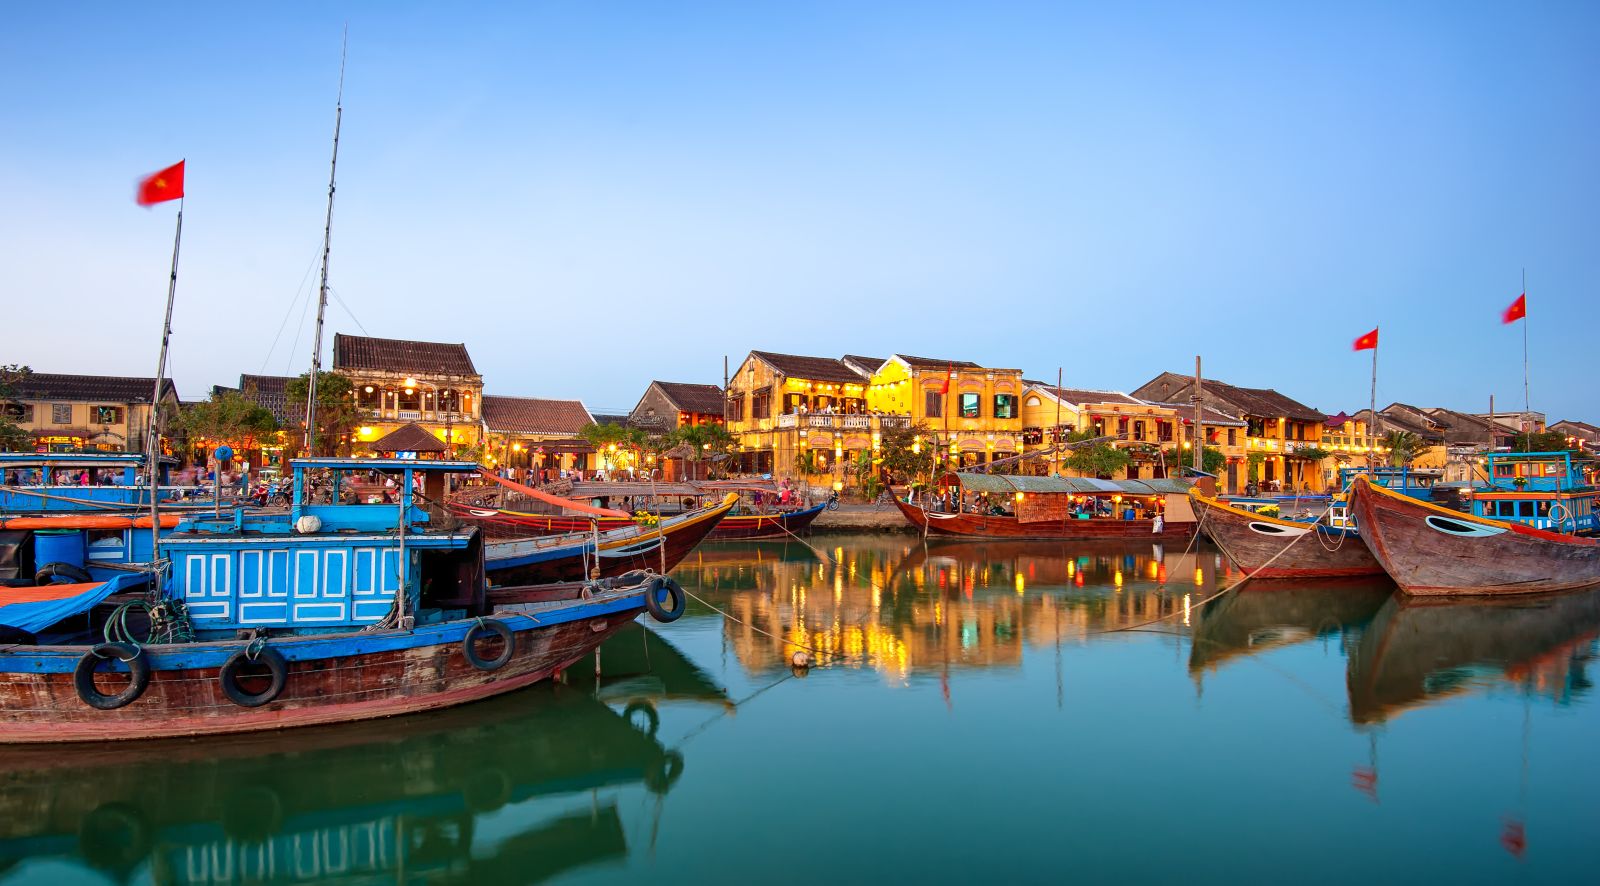 Town and river at dusk in Hoi An Vietnam